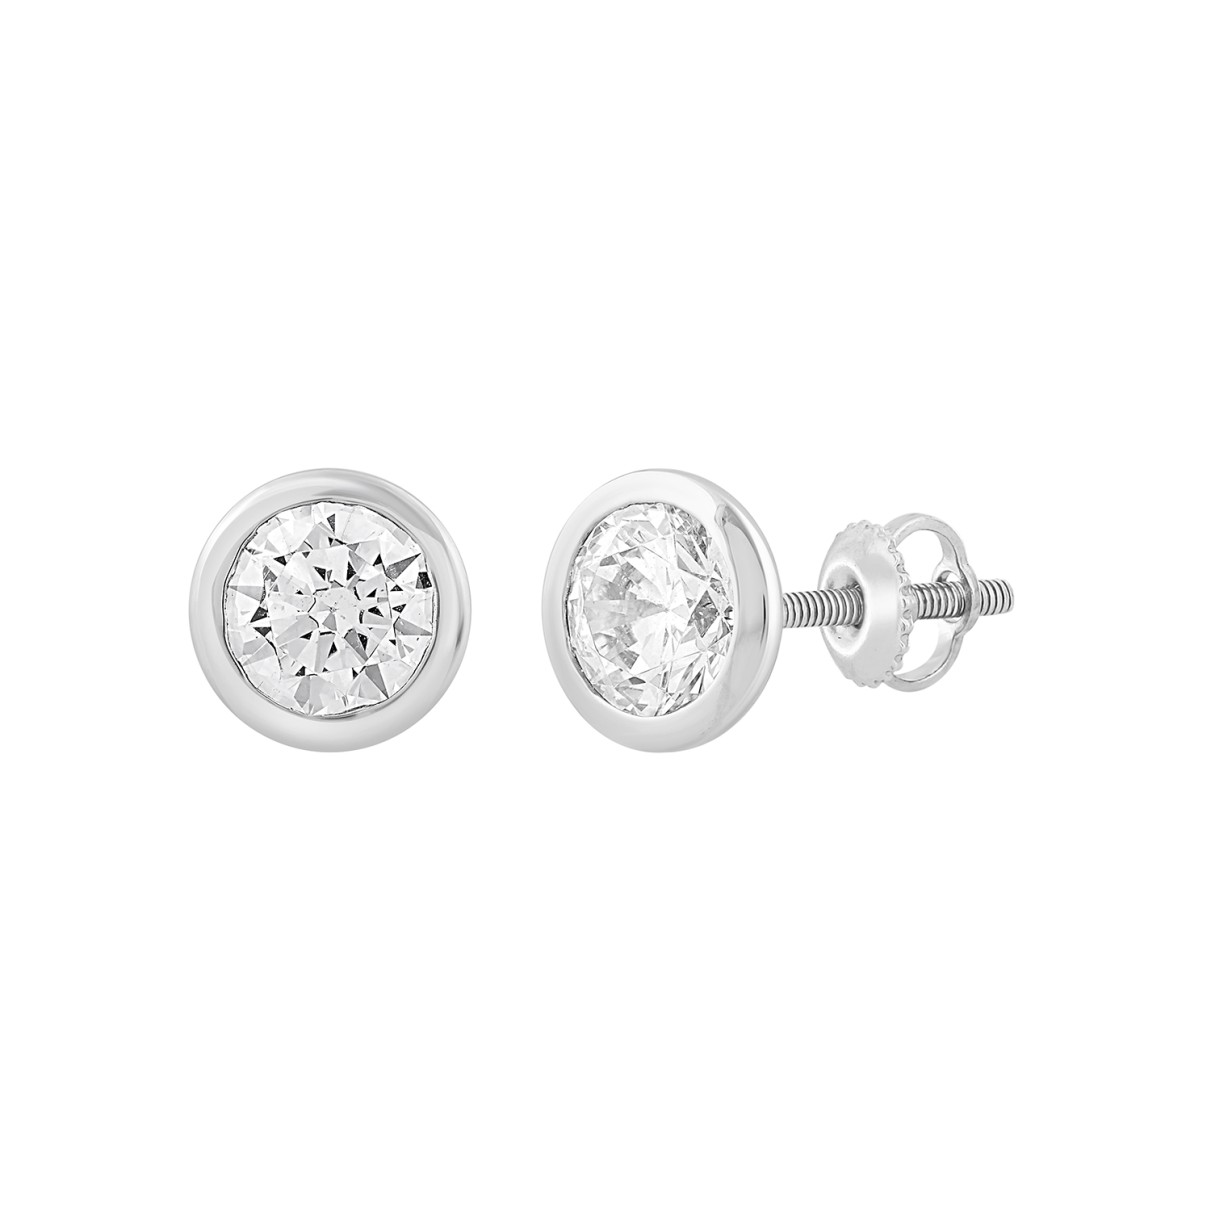 LADIES SOLITAIRE EARRINGS 1CT ROUND DIAMOND 14K WHITE GOLD